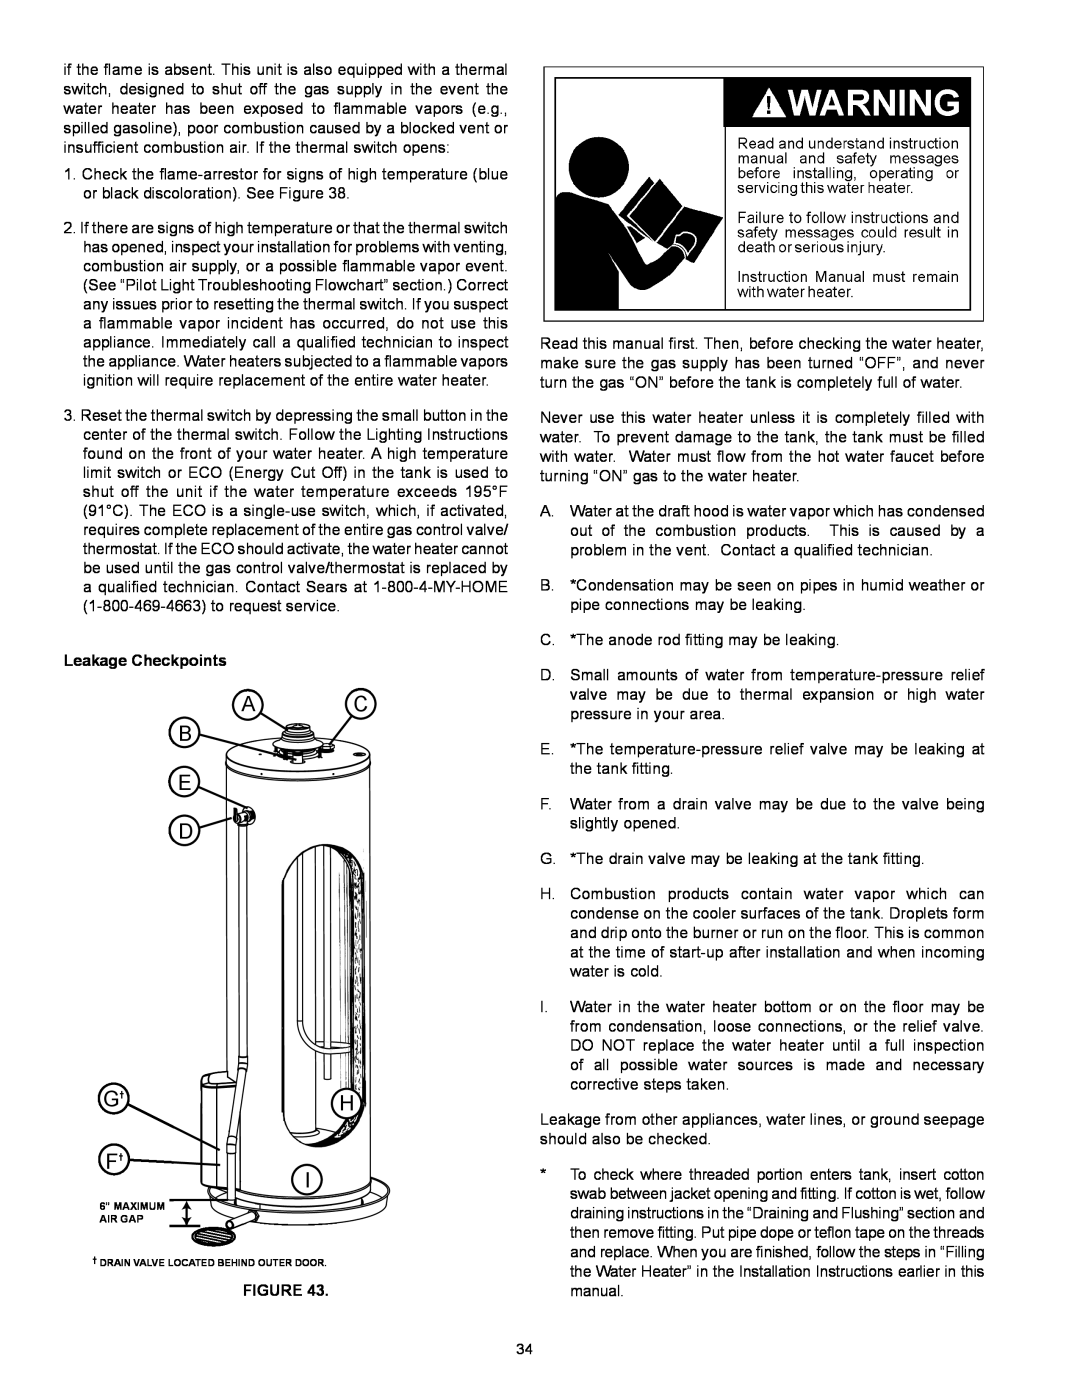 Kenmore 153.331572 owner manual A C B E D, Leakage Checkpoints 